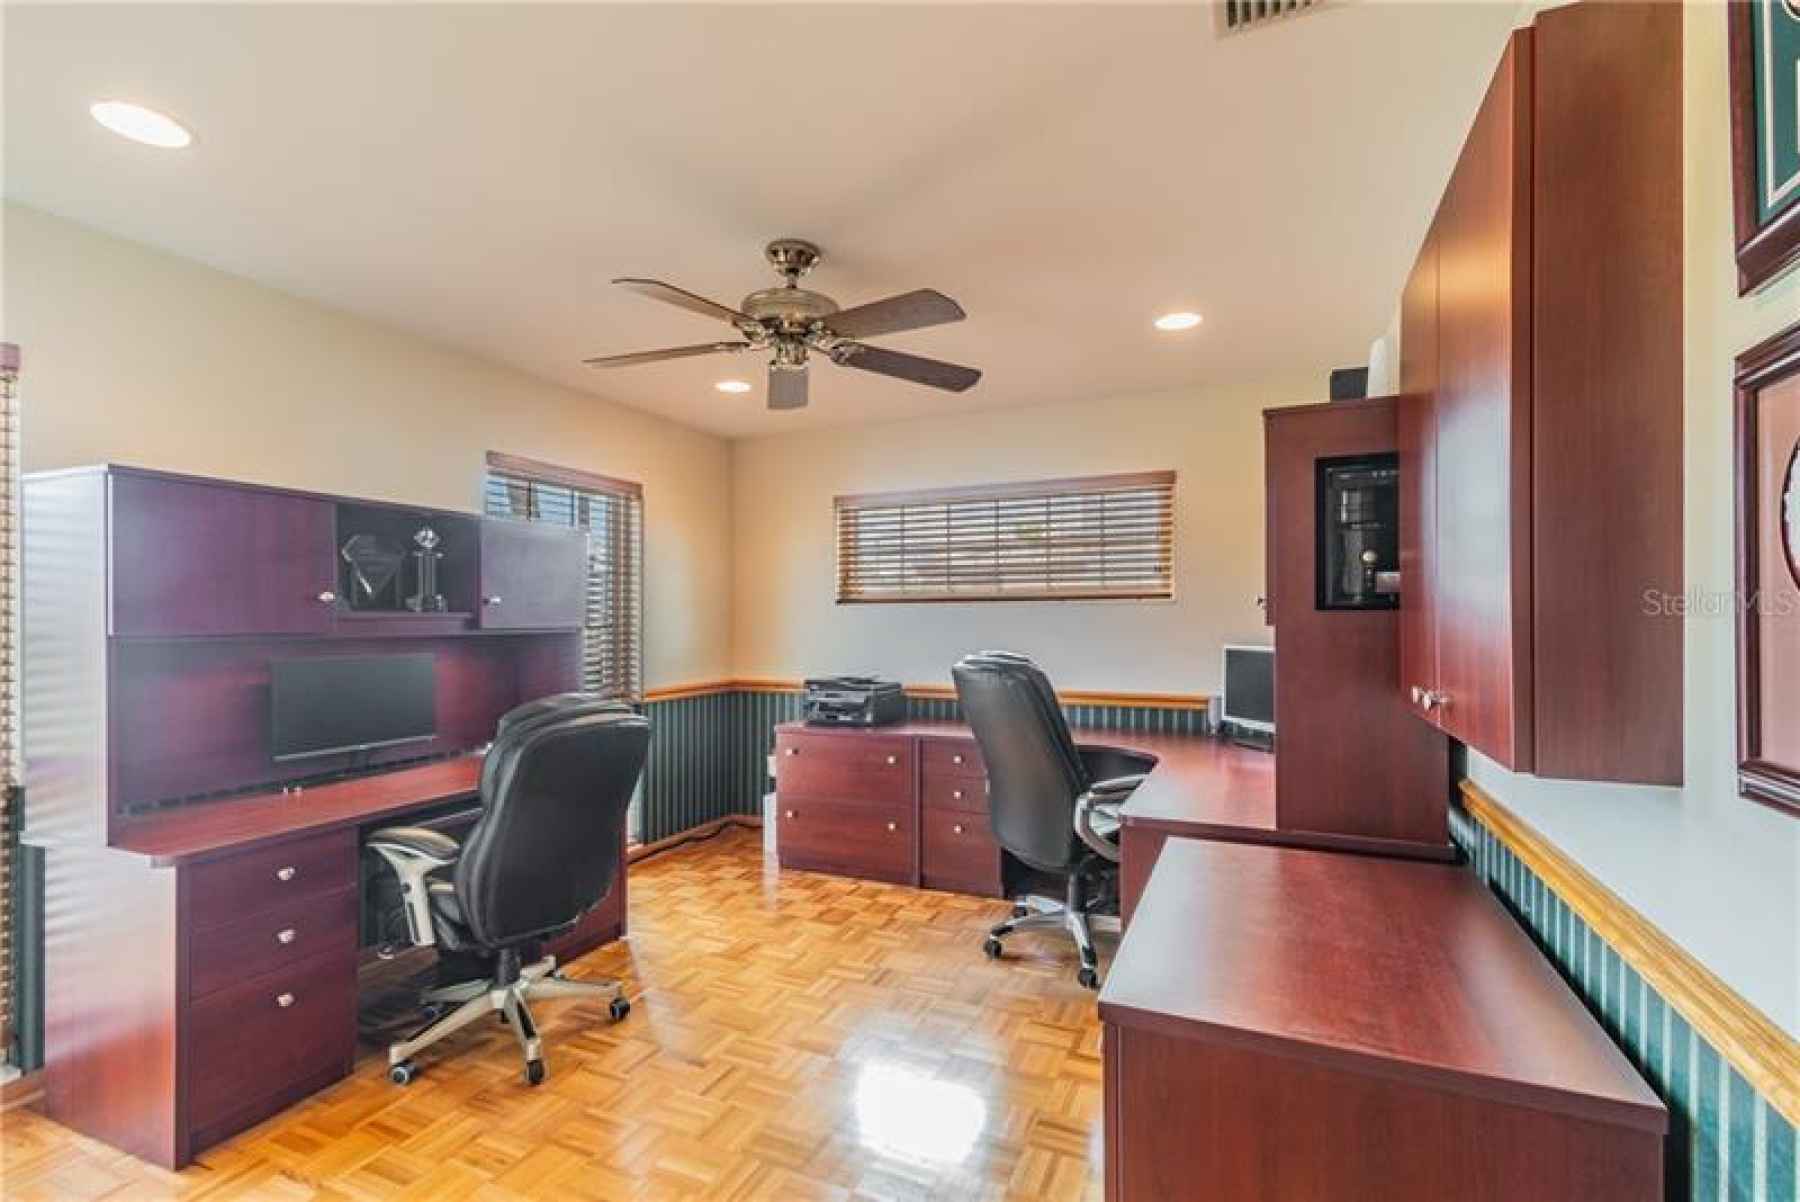 Dedicated office in front of house offers quiet workspace away from hub of family.